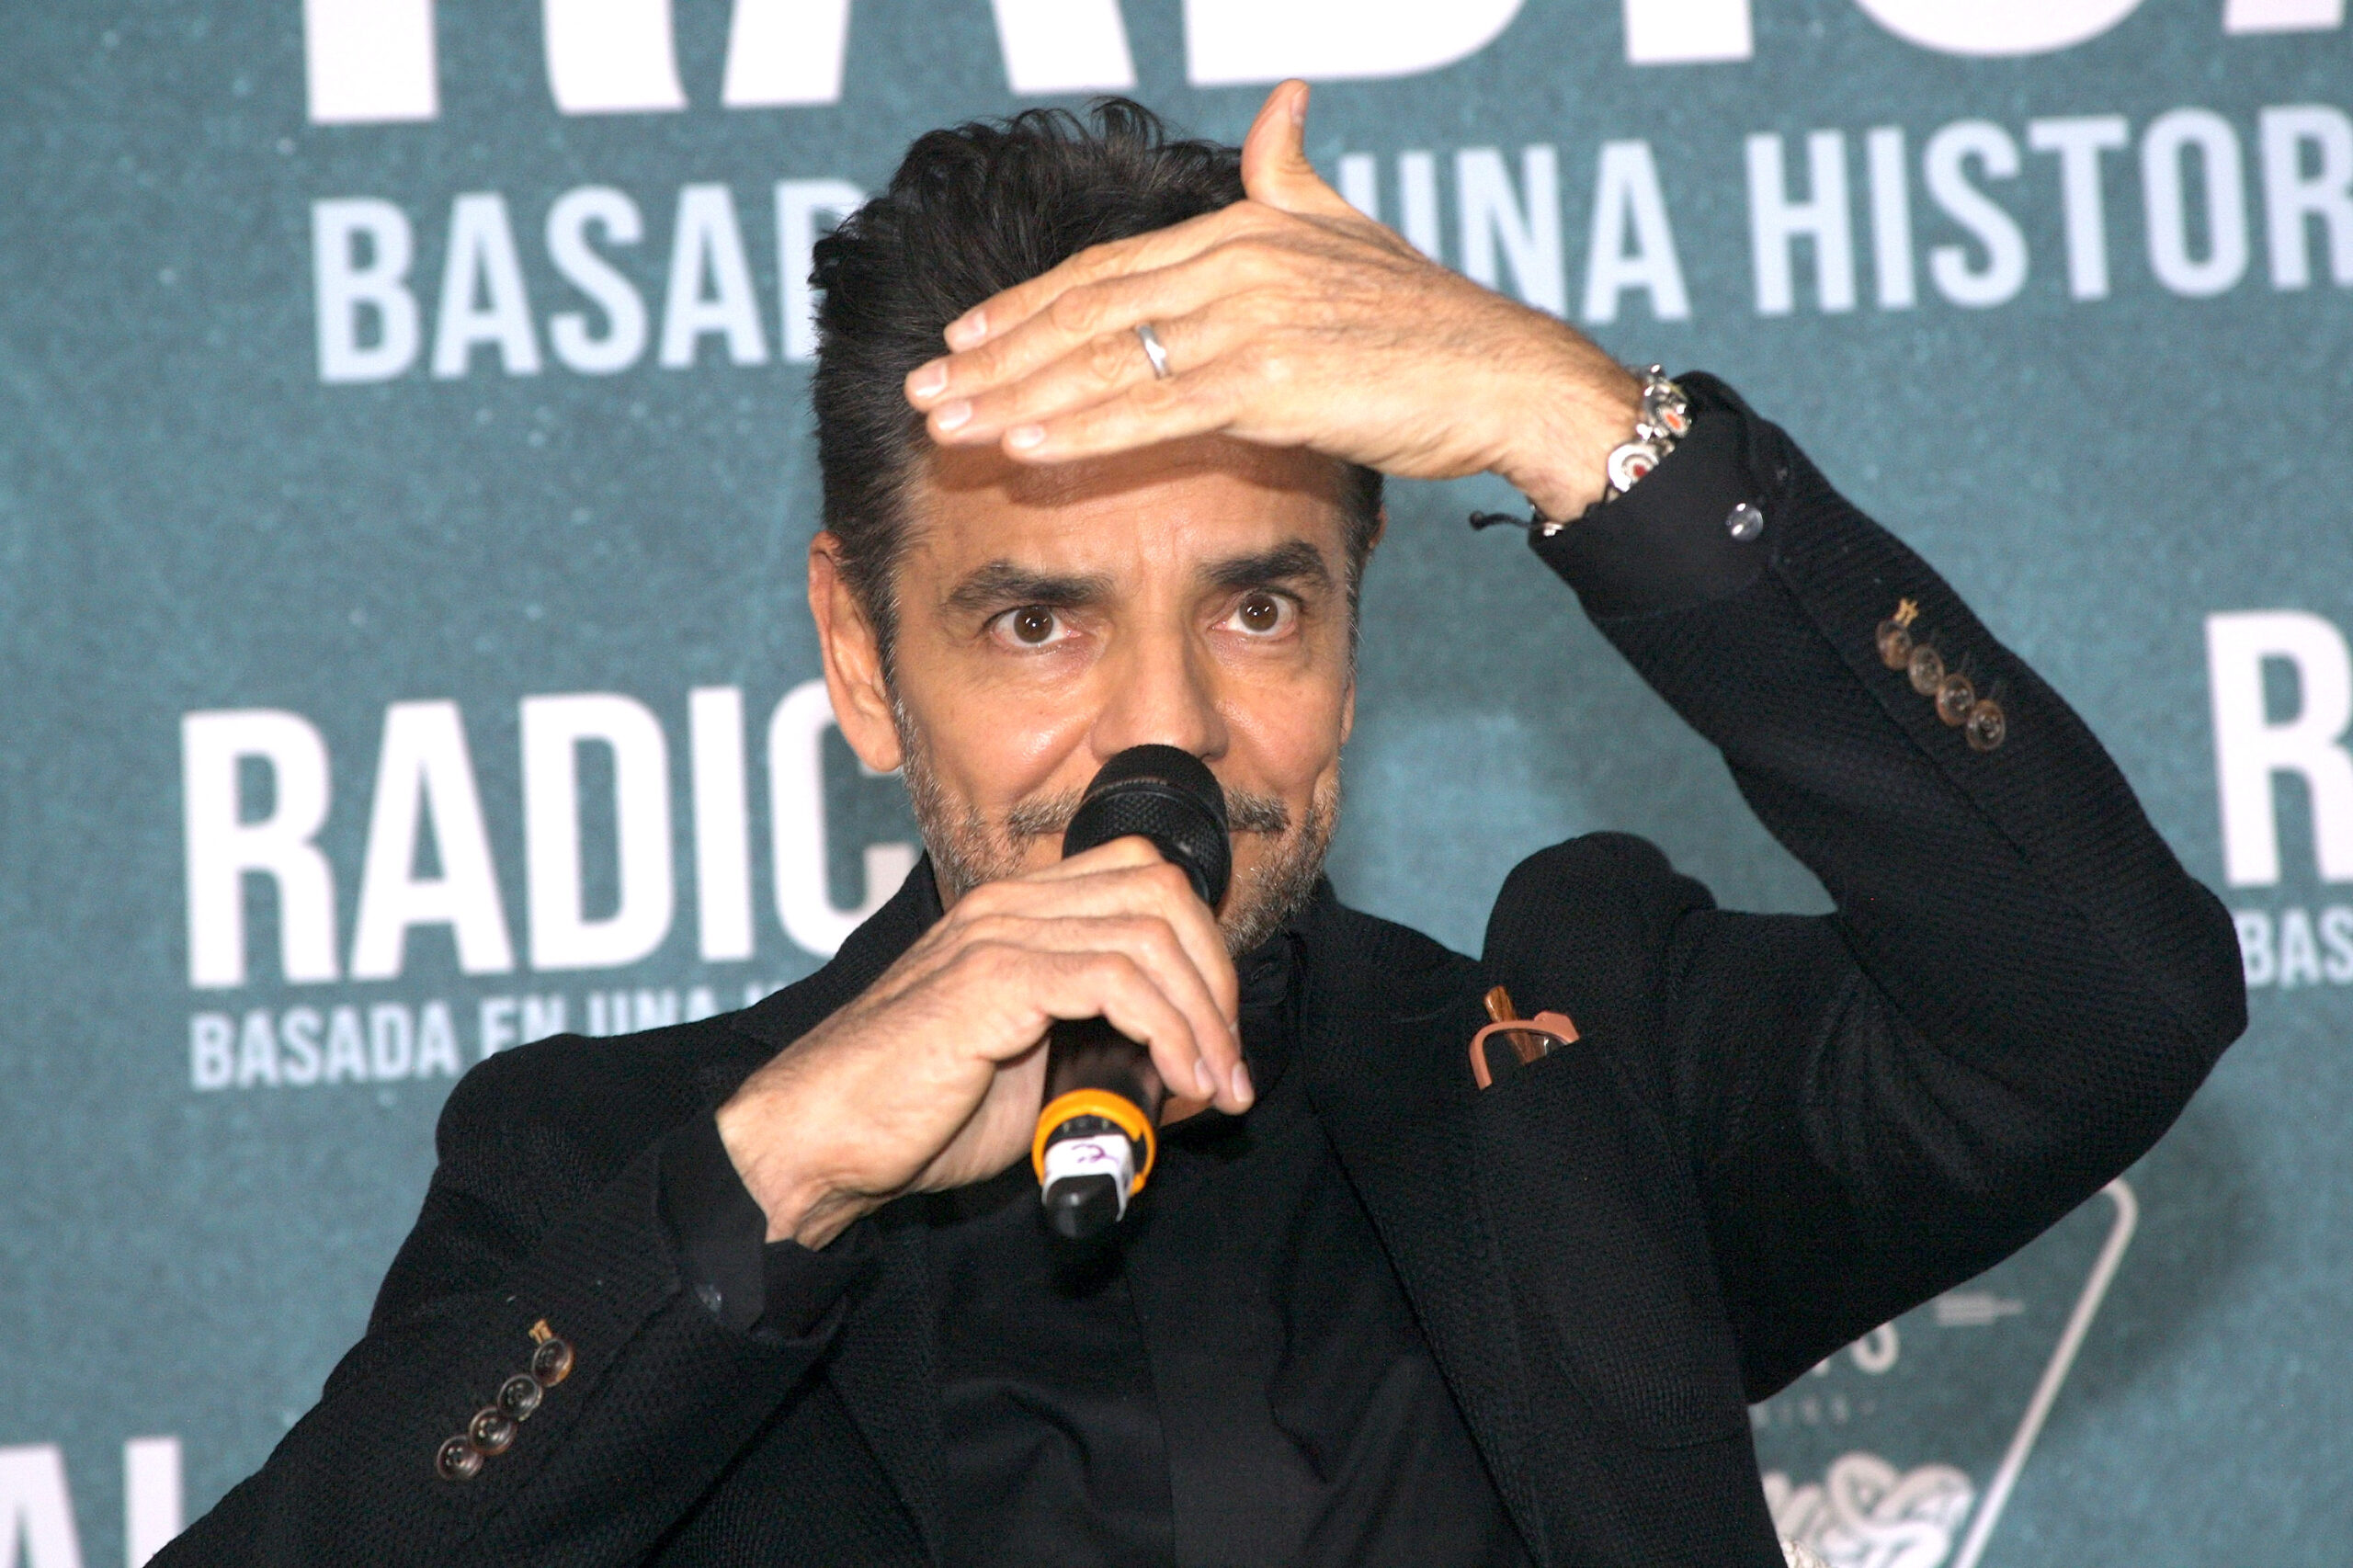 victoria-ruffo-did-not-invite-eugenio-derbez-to-her-granddaughter's-baby-shower-and-he-responds-if-he-wanted-to-go-or-not